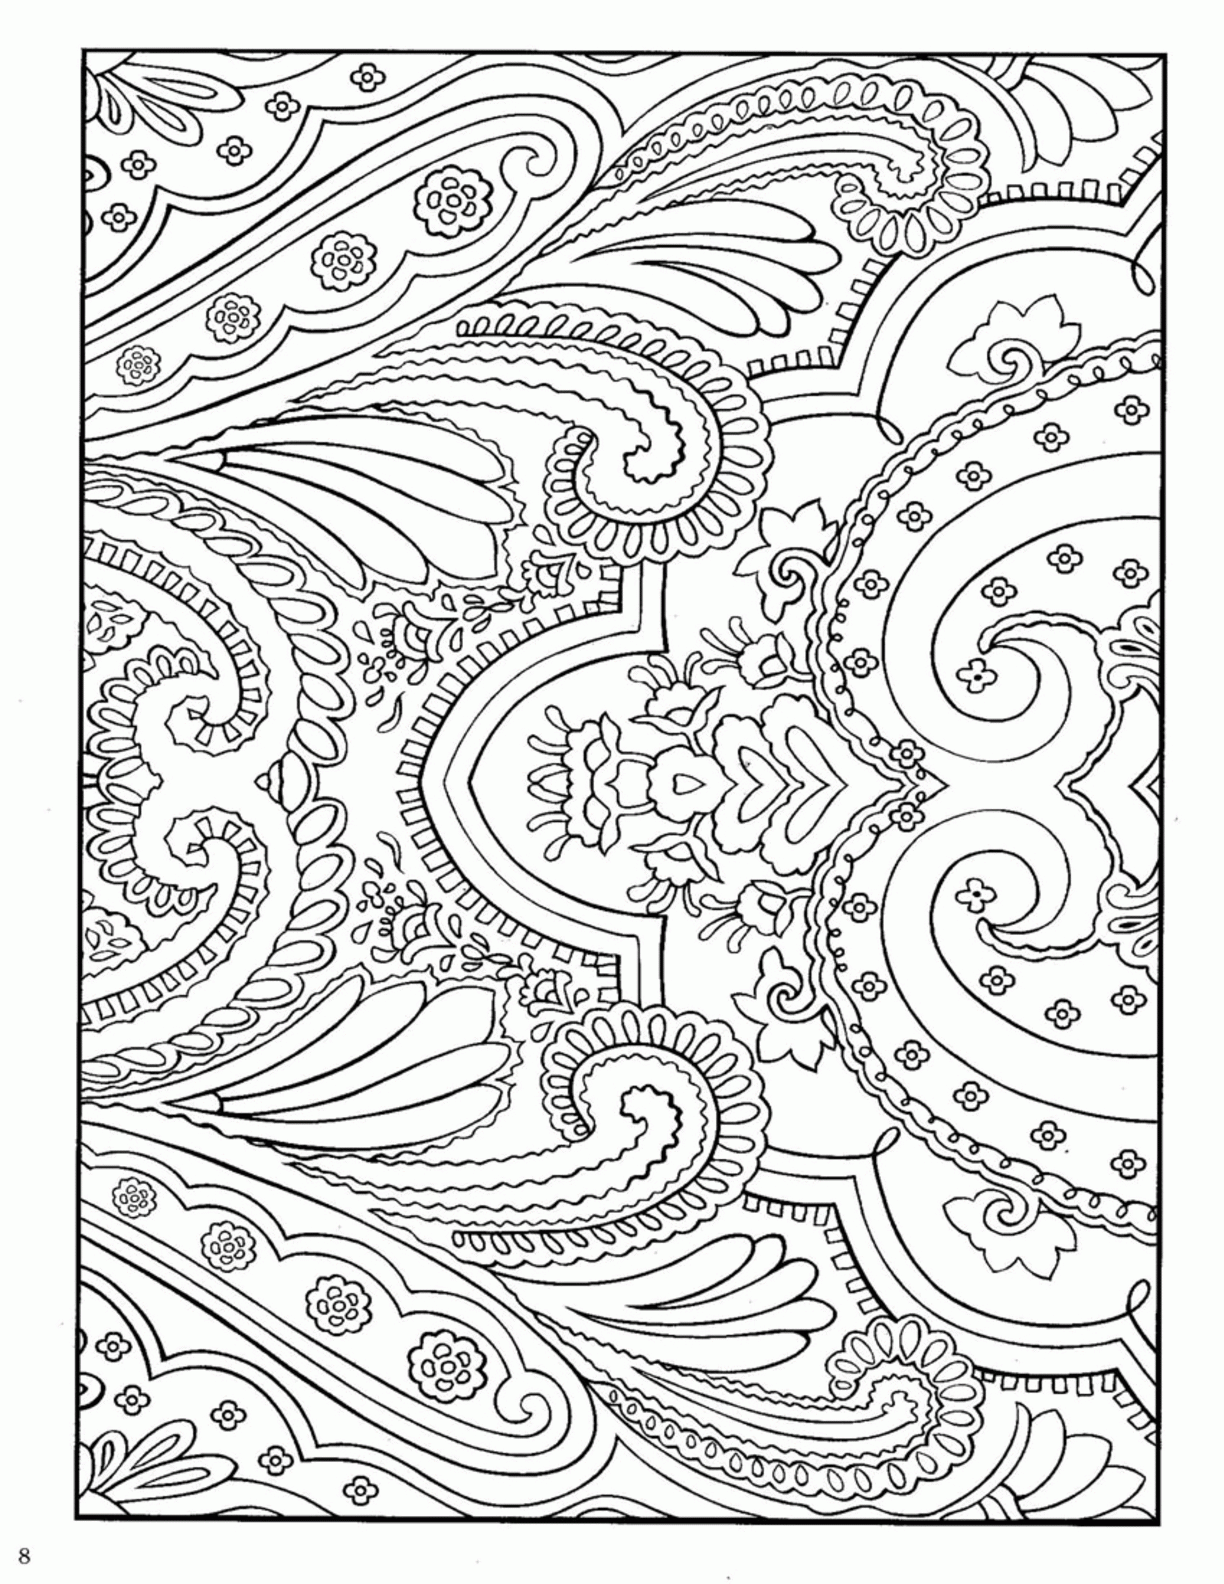 Paisley Coloring Pages Printable - Printable Word Searches